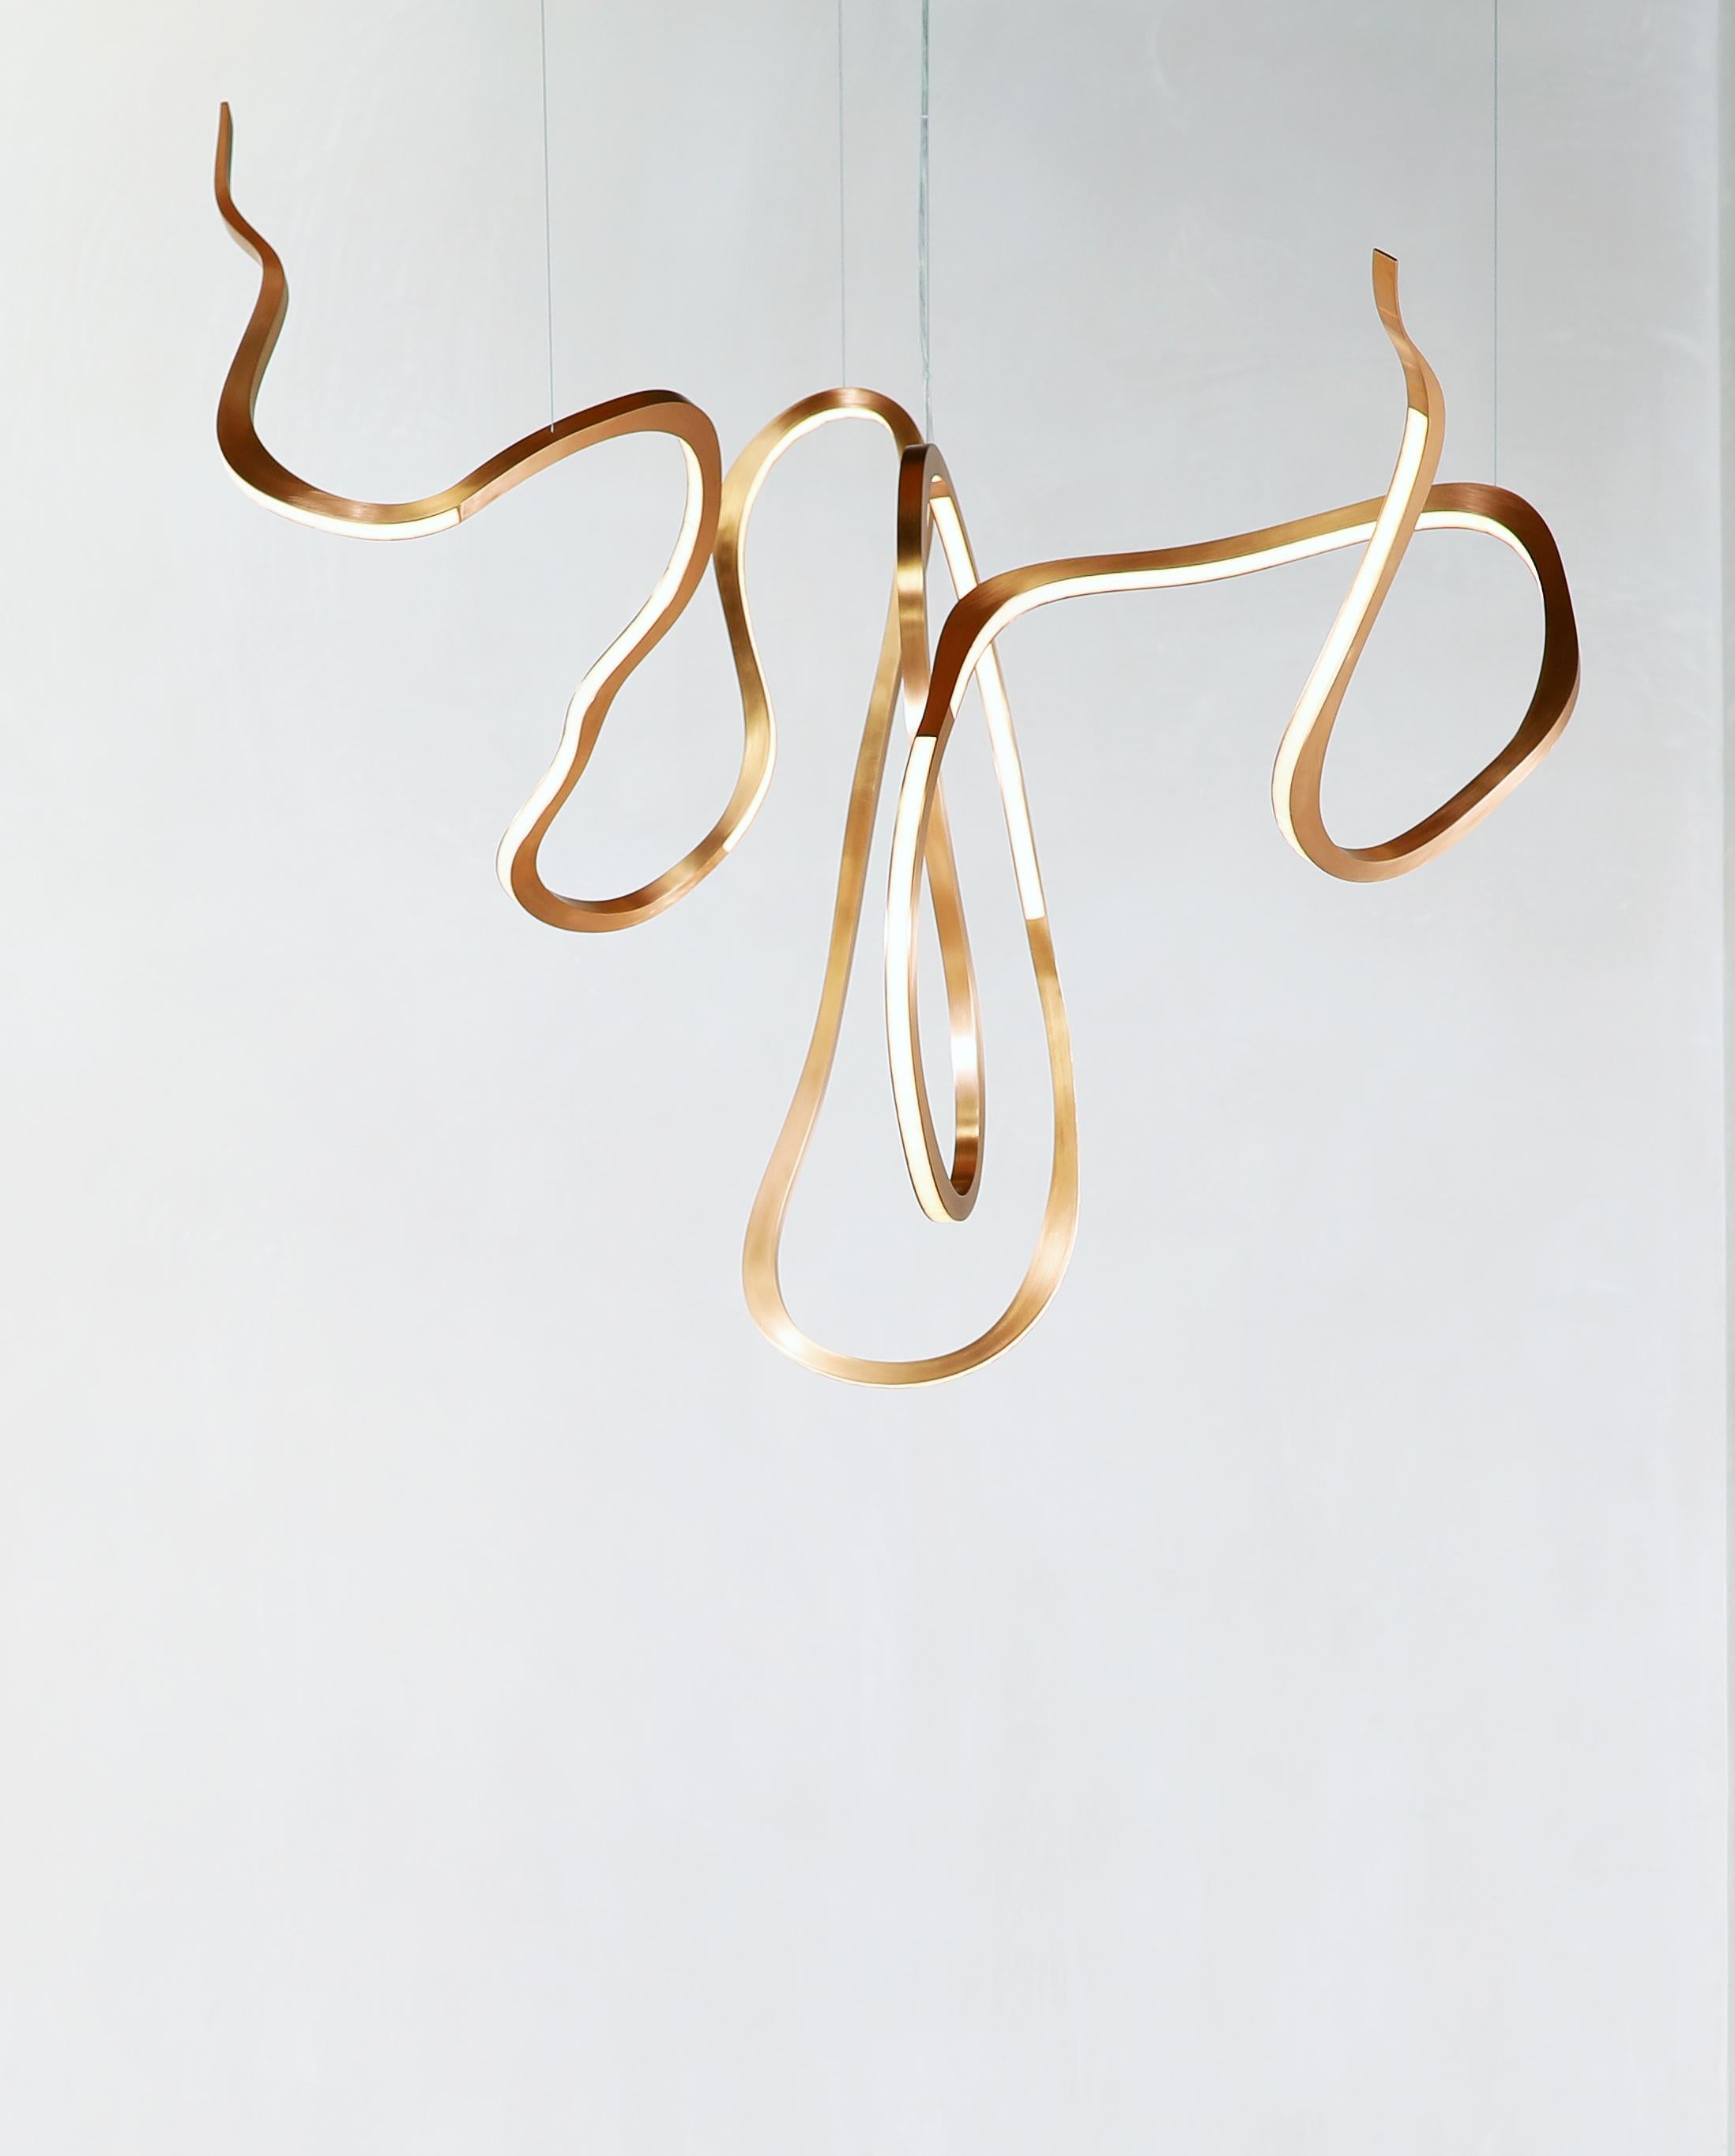 Contemporary Niamh Barry, Artist's Hand IV, Suspended Light Sculpture, Ireland, 2020 For Sale